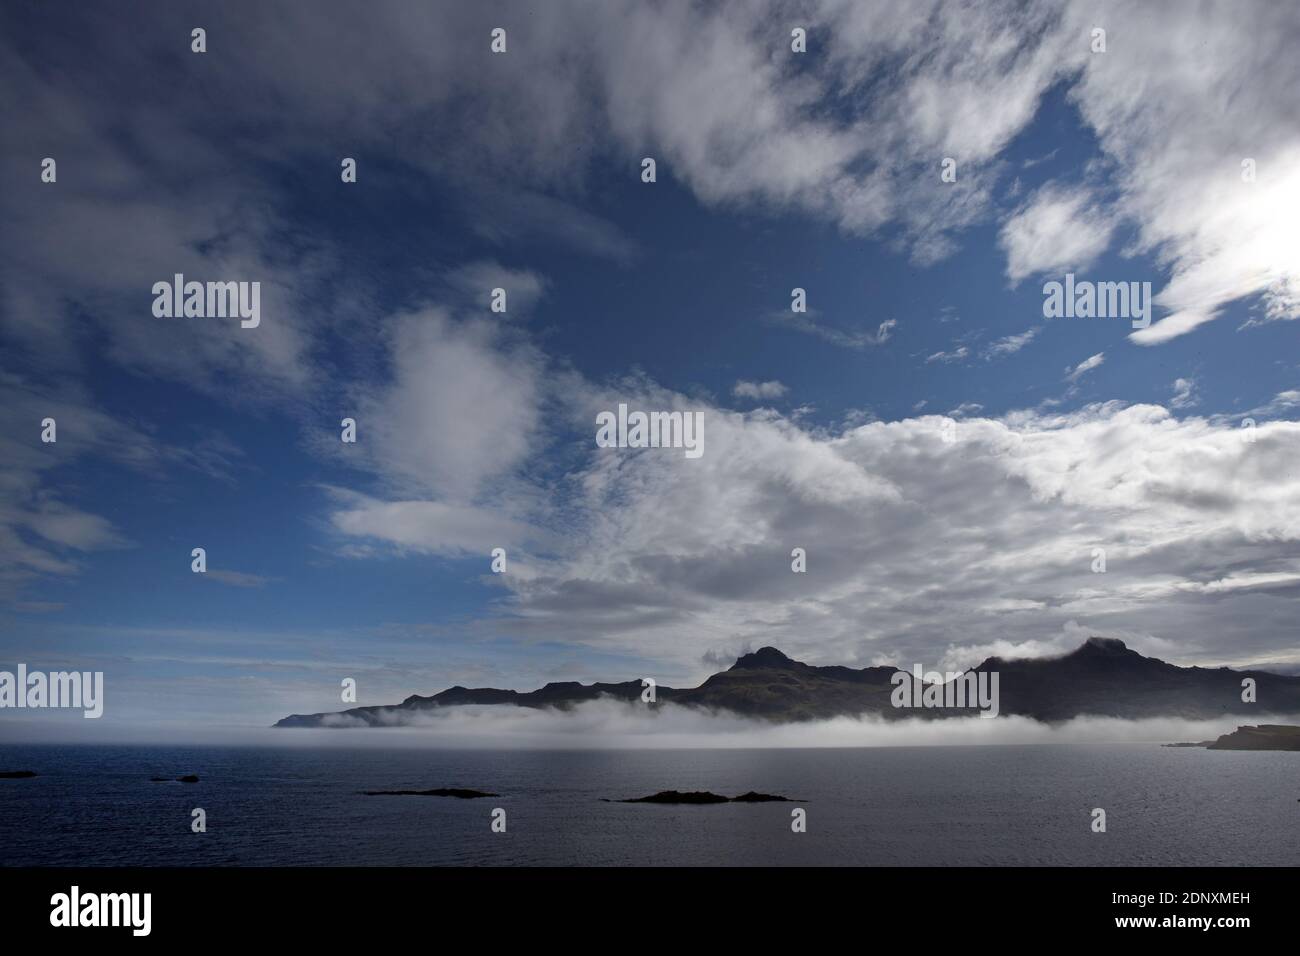 Iceland / East Iceland/Borgarfjordur/ View from Borgarfjordur to mountains and the magnificent coastline. Stock Photo